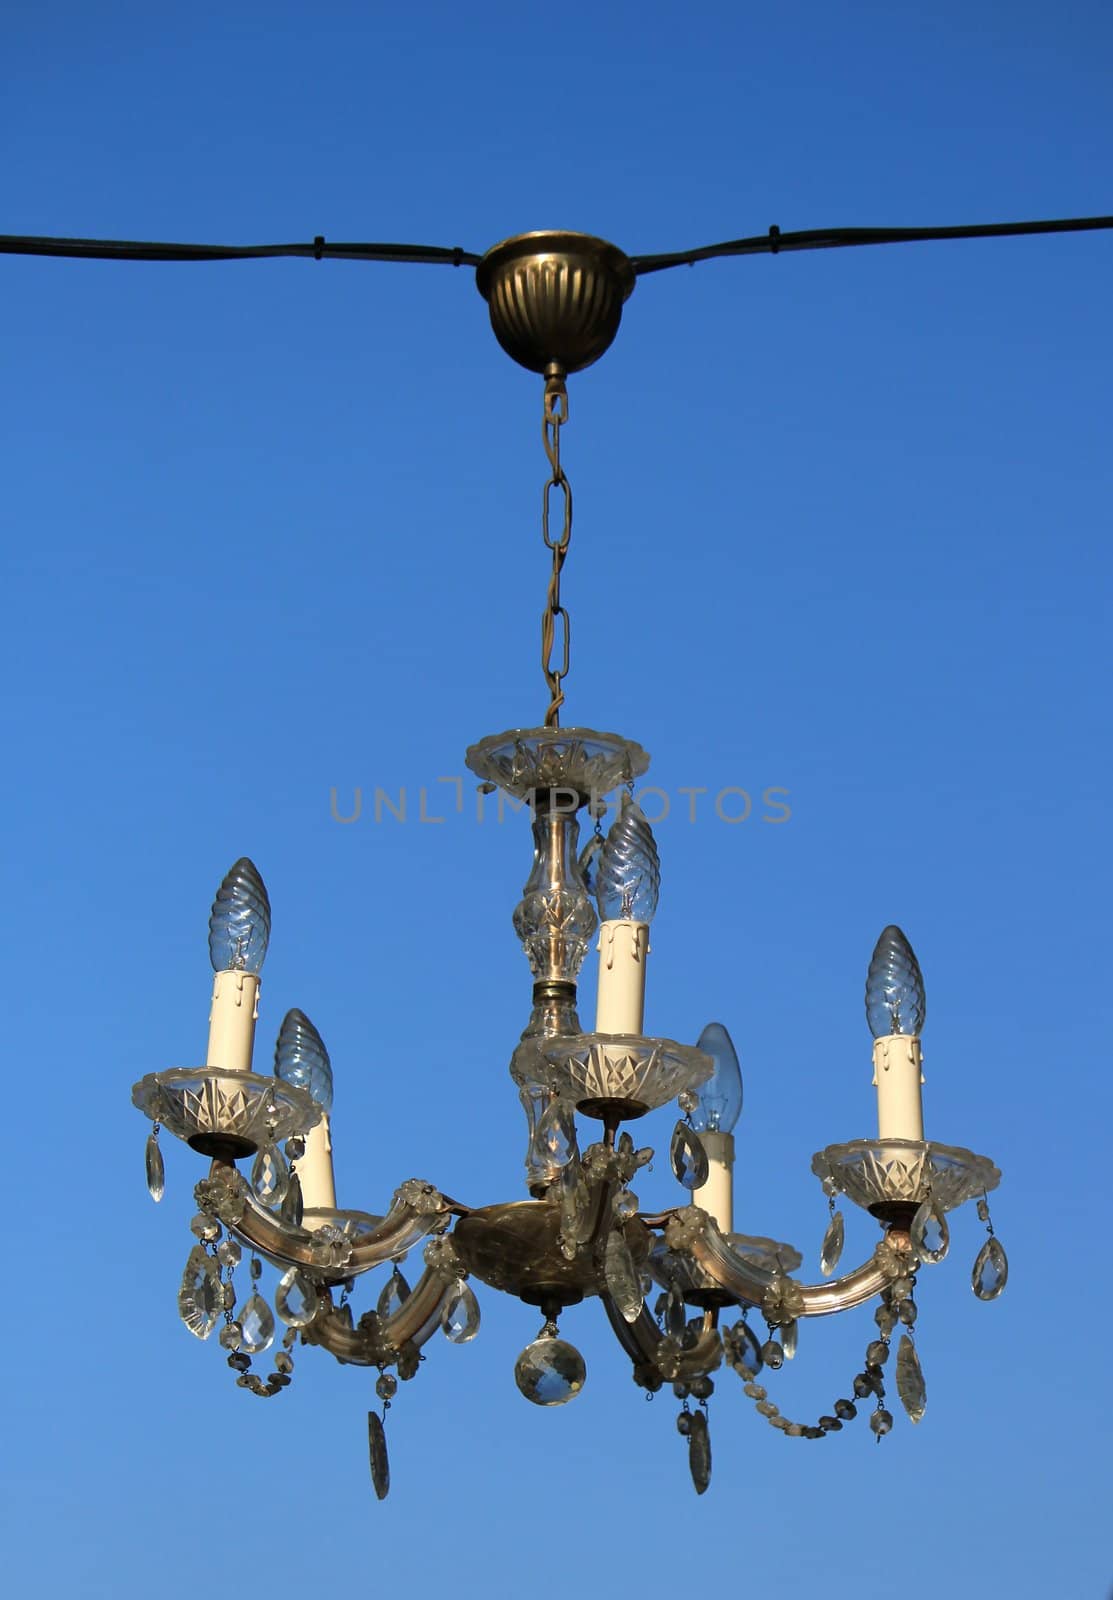 Ceiling light with five electrical candles hanging outside and blue sky in the background